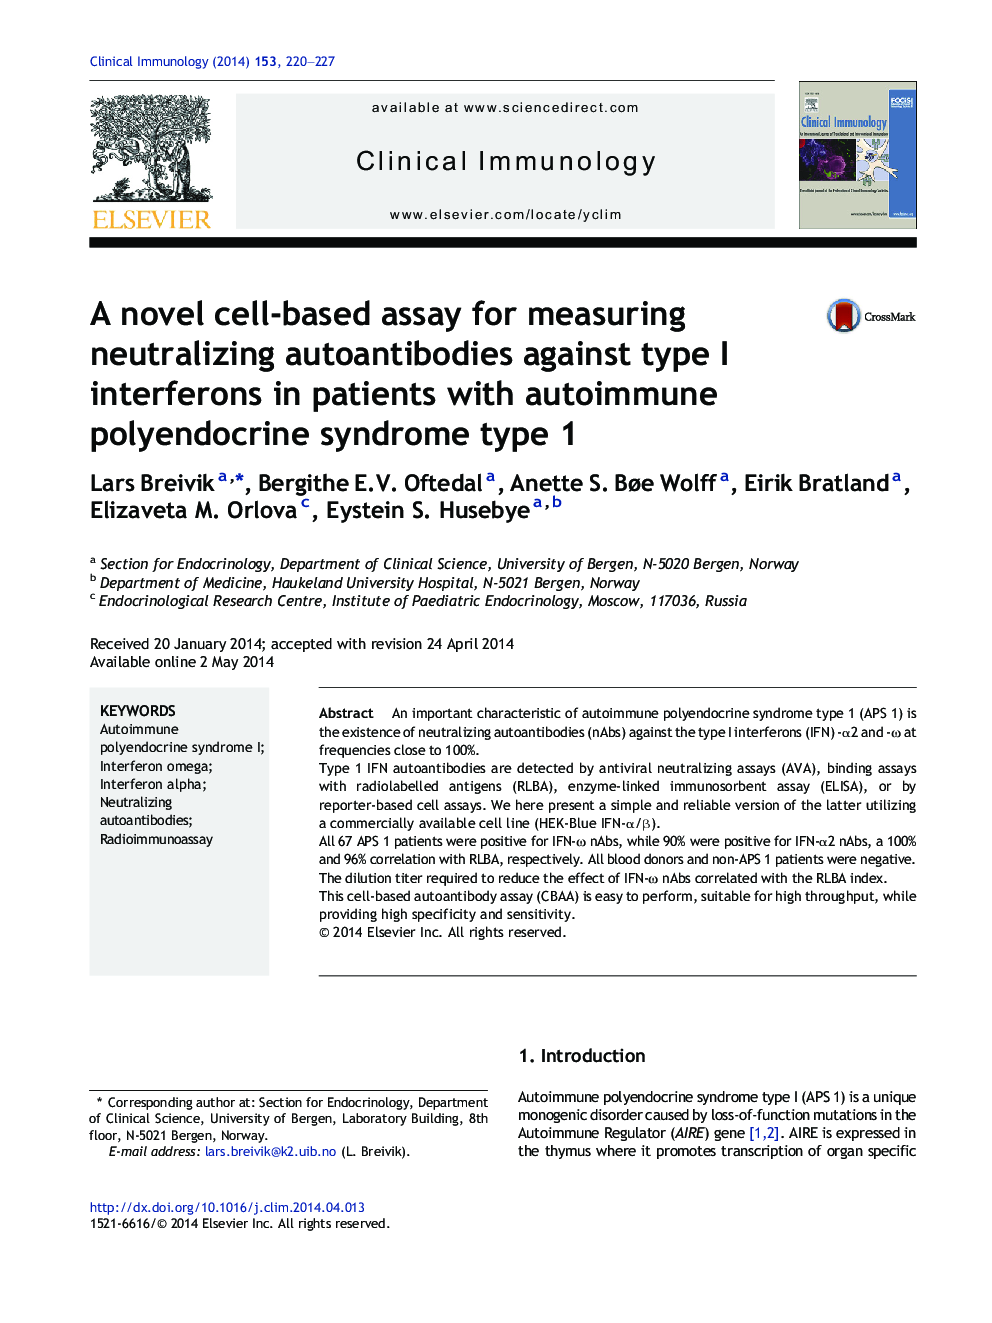 A novel cell-based assay for measuring neutralizing autoantibodies against type I interferons in patients with autoimmune polyendocrine syndrome type 1